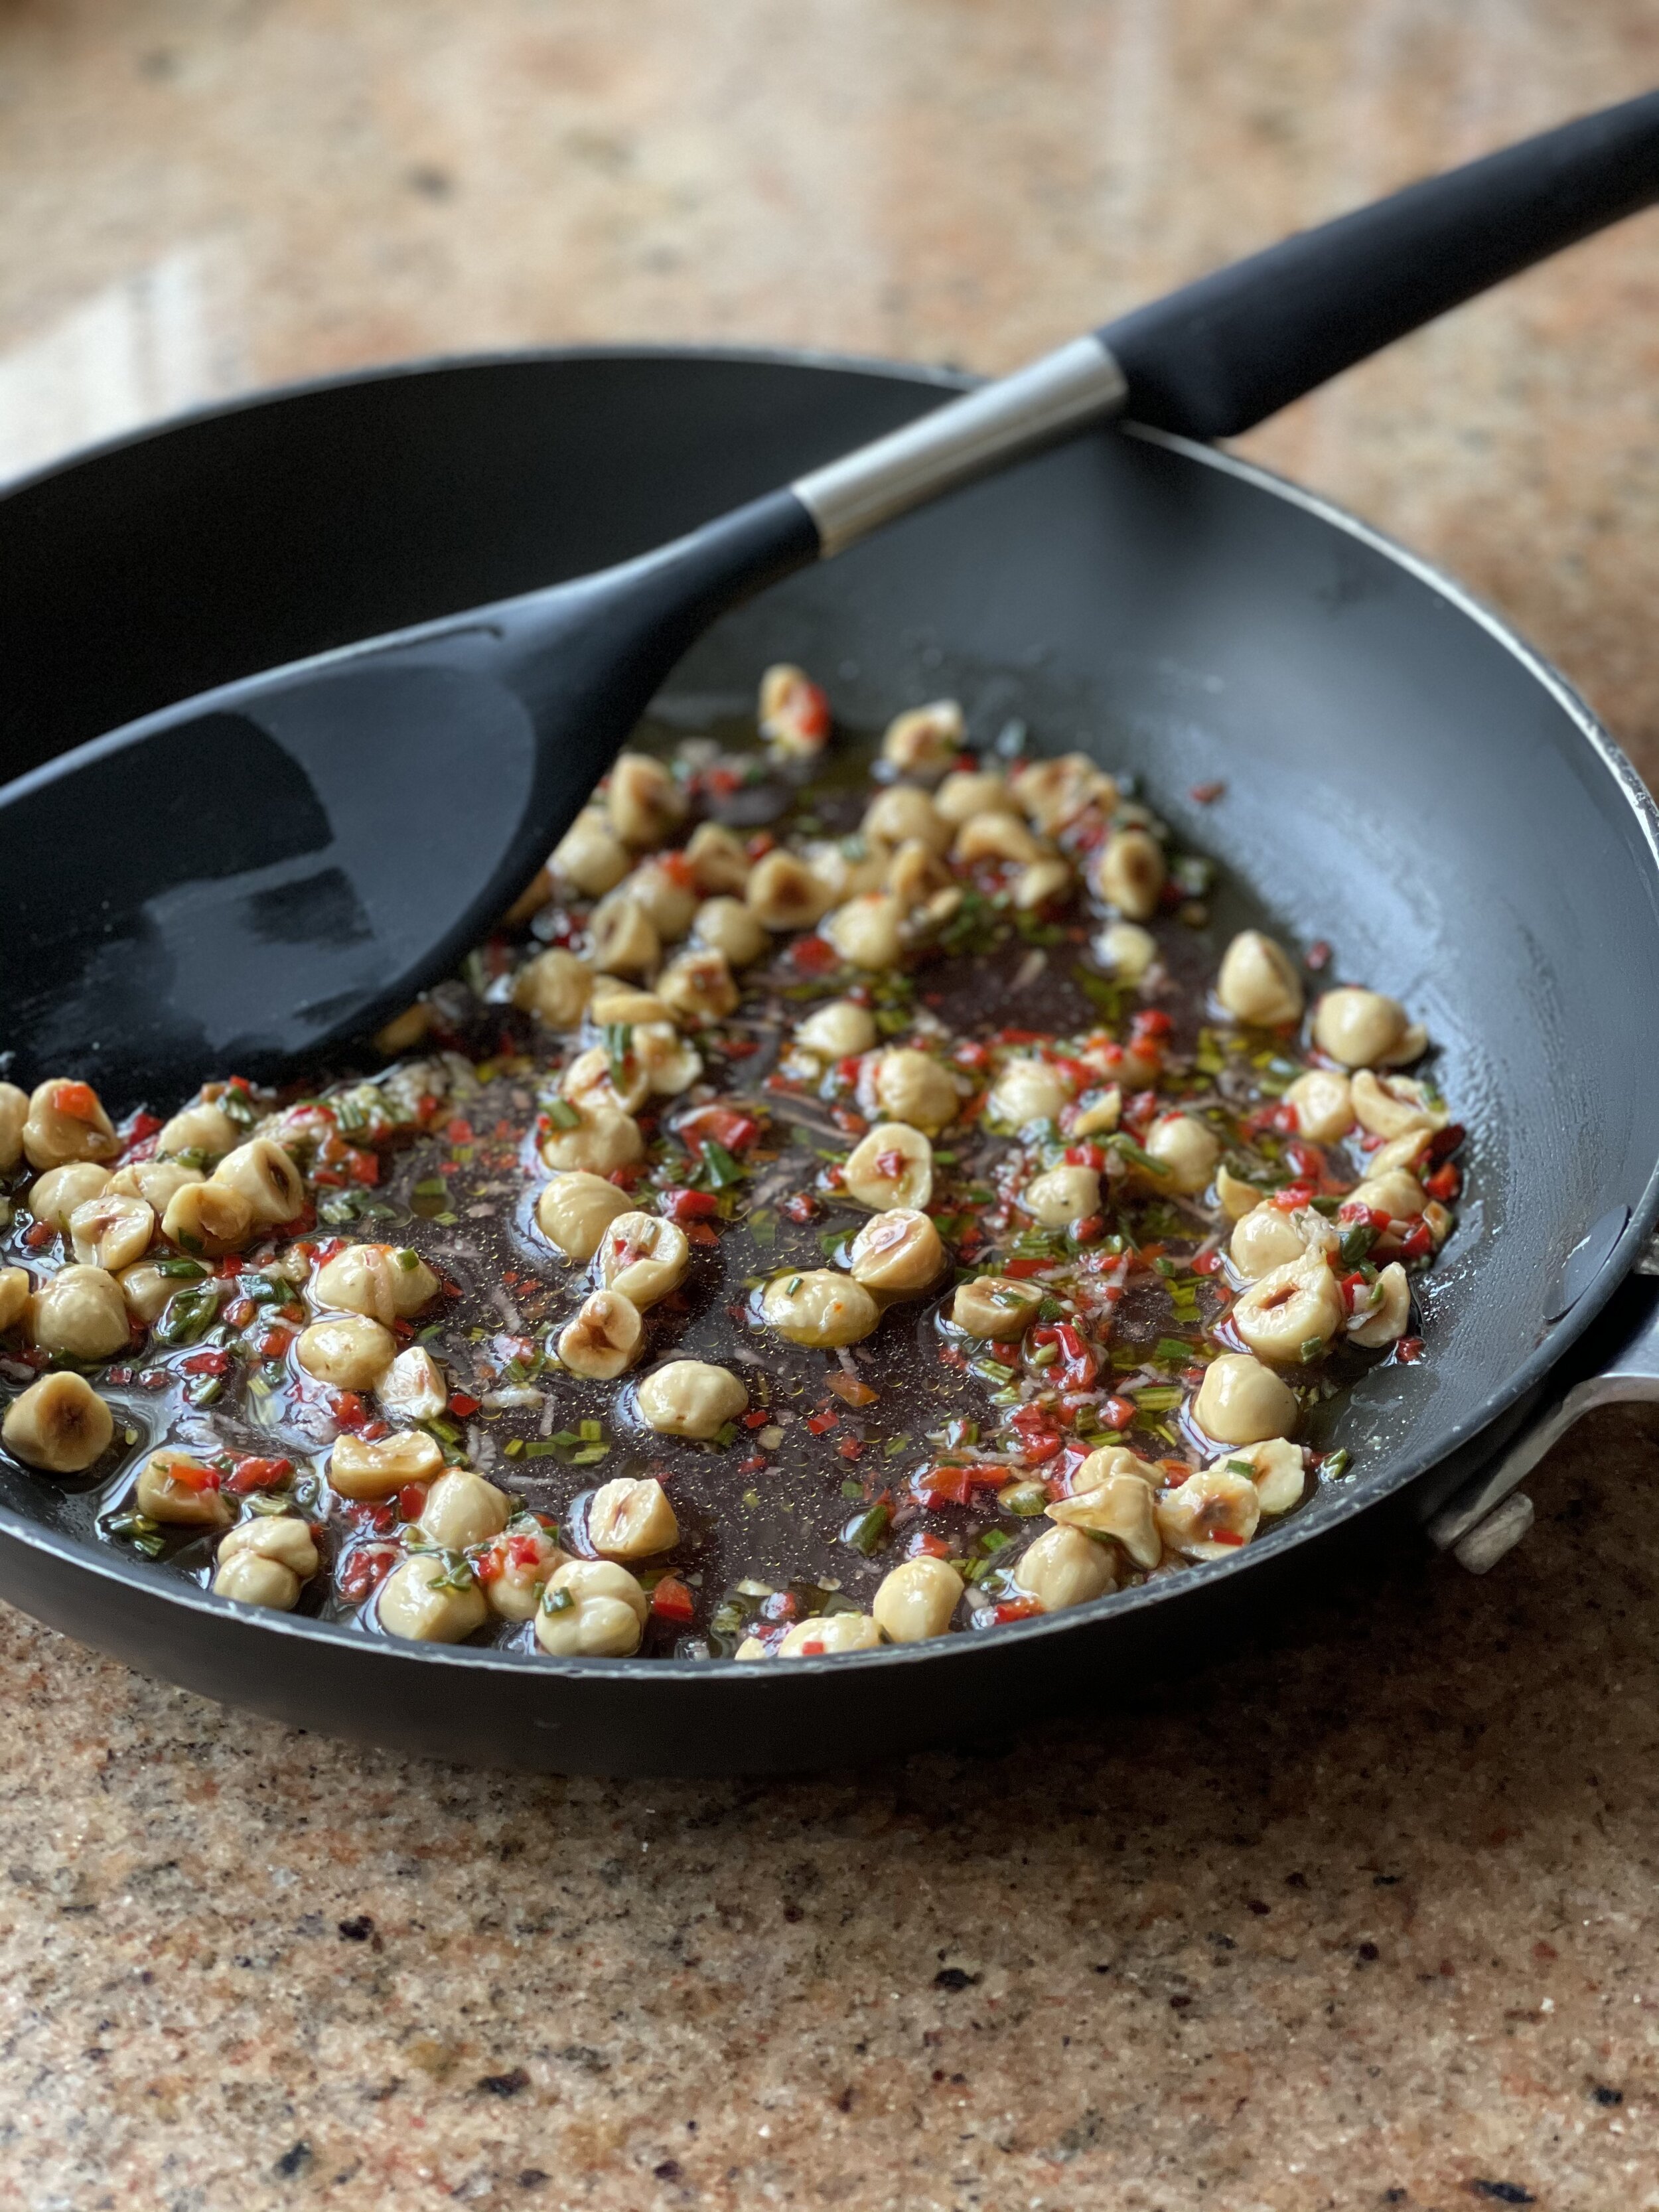 Garlic, chilli, rosemary and hazelnuts with olive oil and red wine vinegar in the frying pan - the hot dressing to the pasta